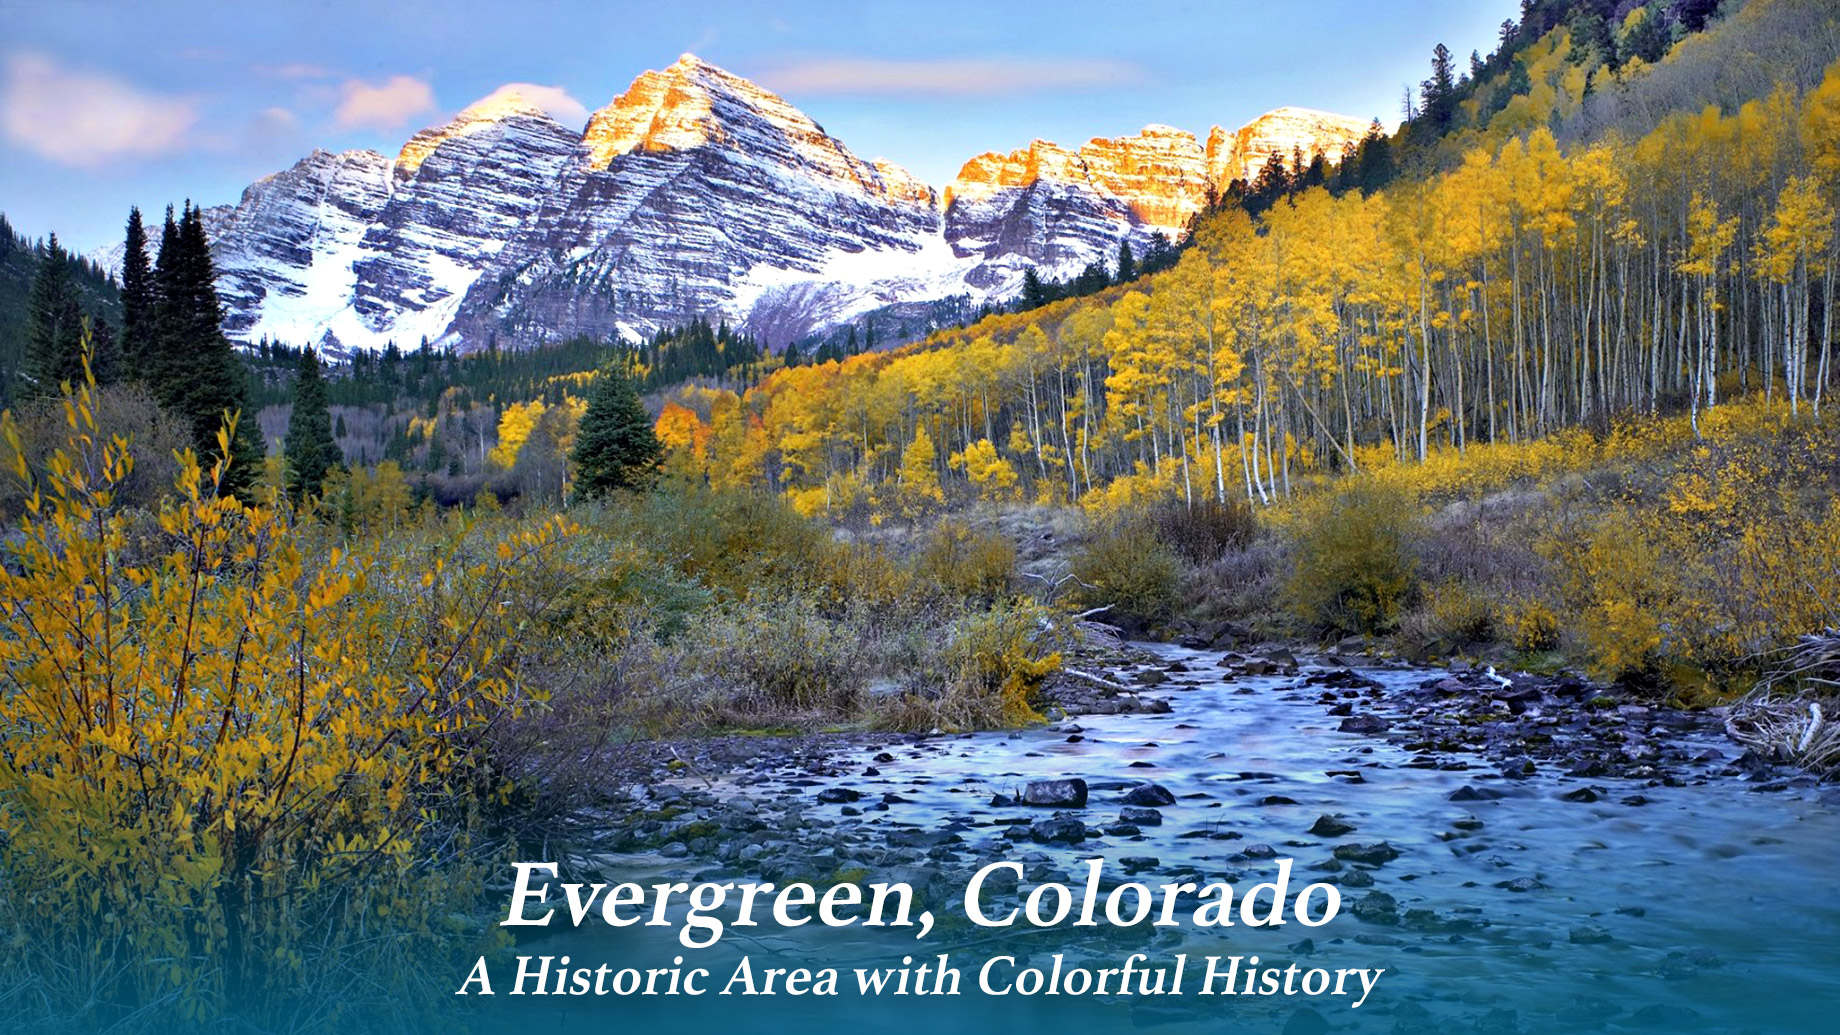 Evergreen, Colorado - A Historic Area with Colorful History